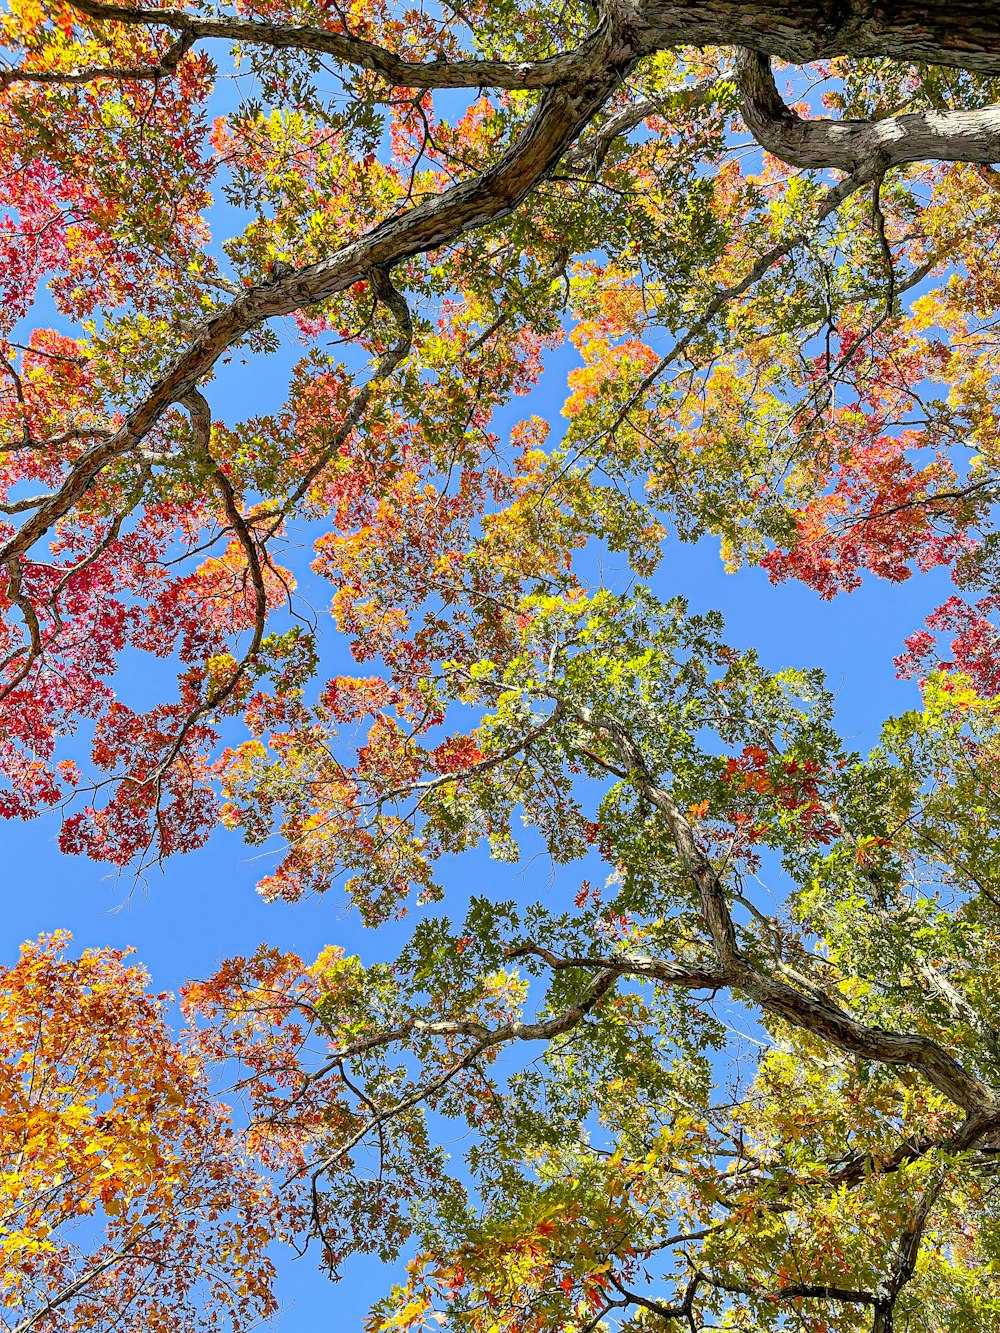 looking up at trees with colorful leaves